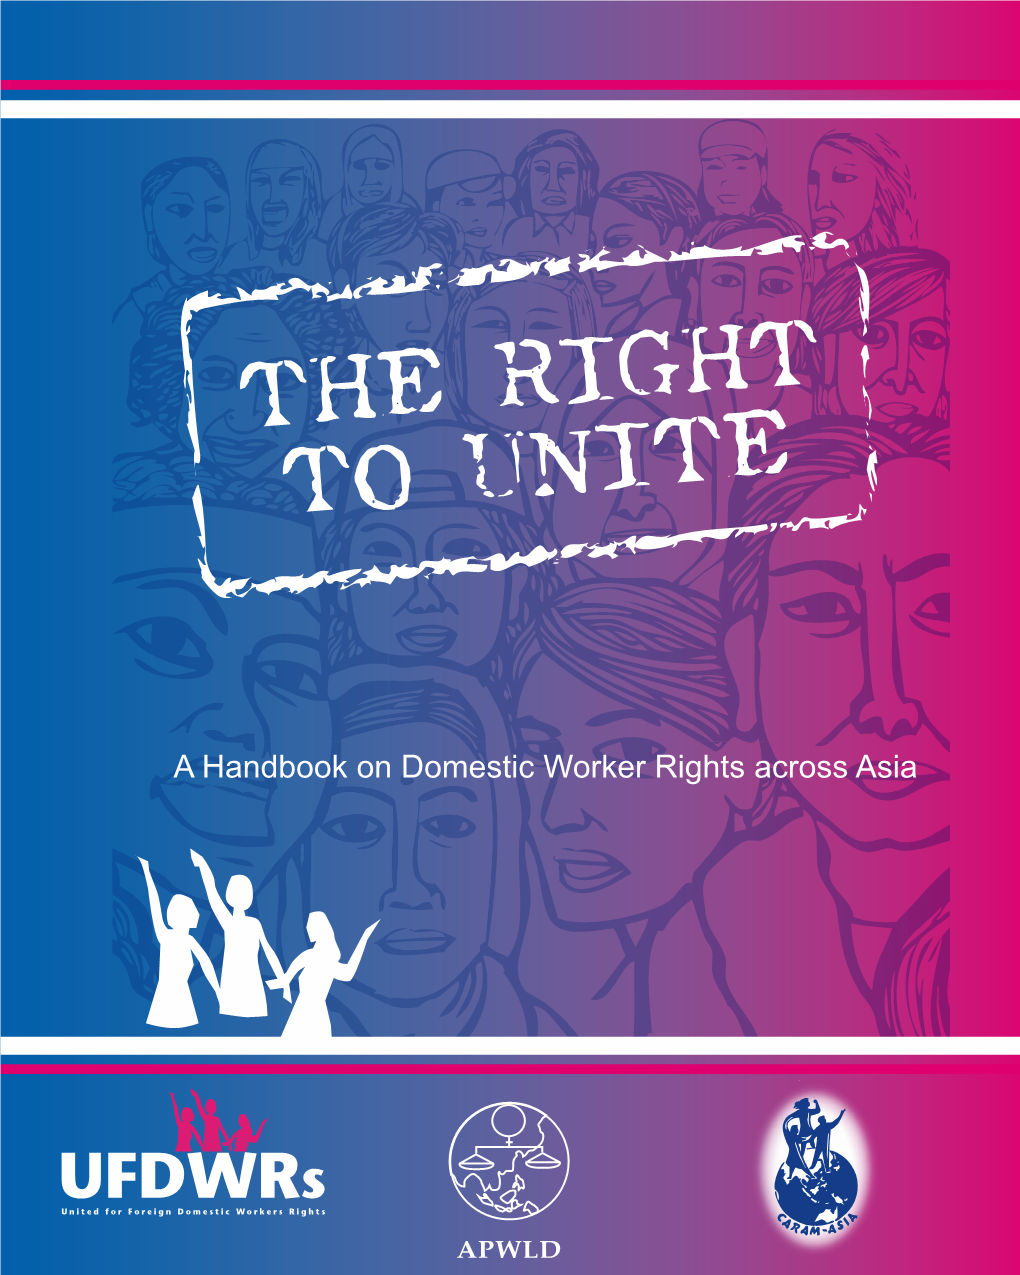 A Handbook on Domestic Worker Rights Across Asia